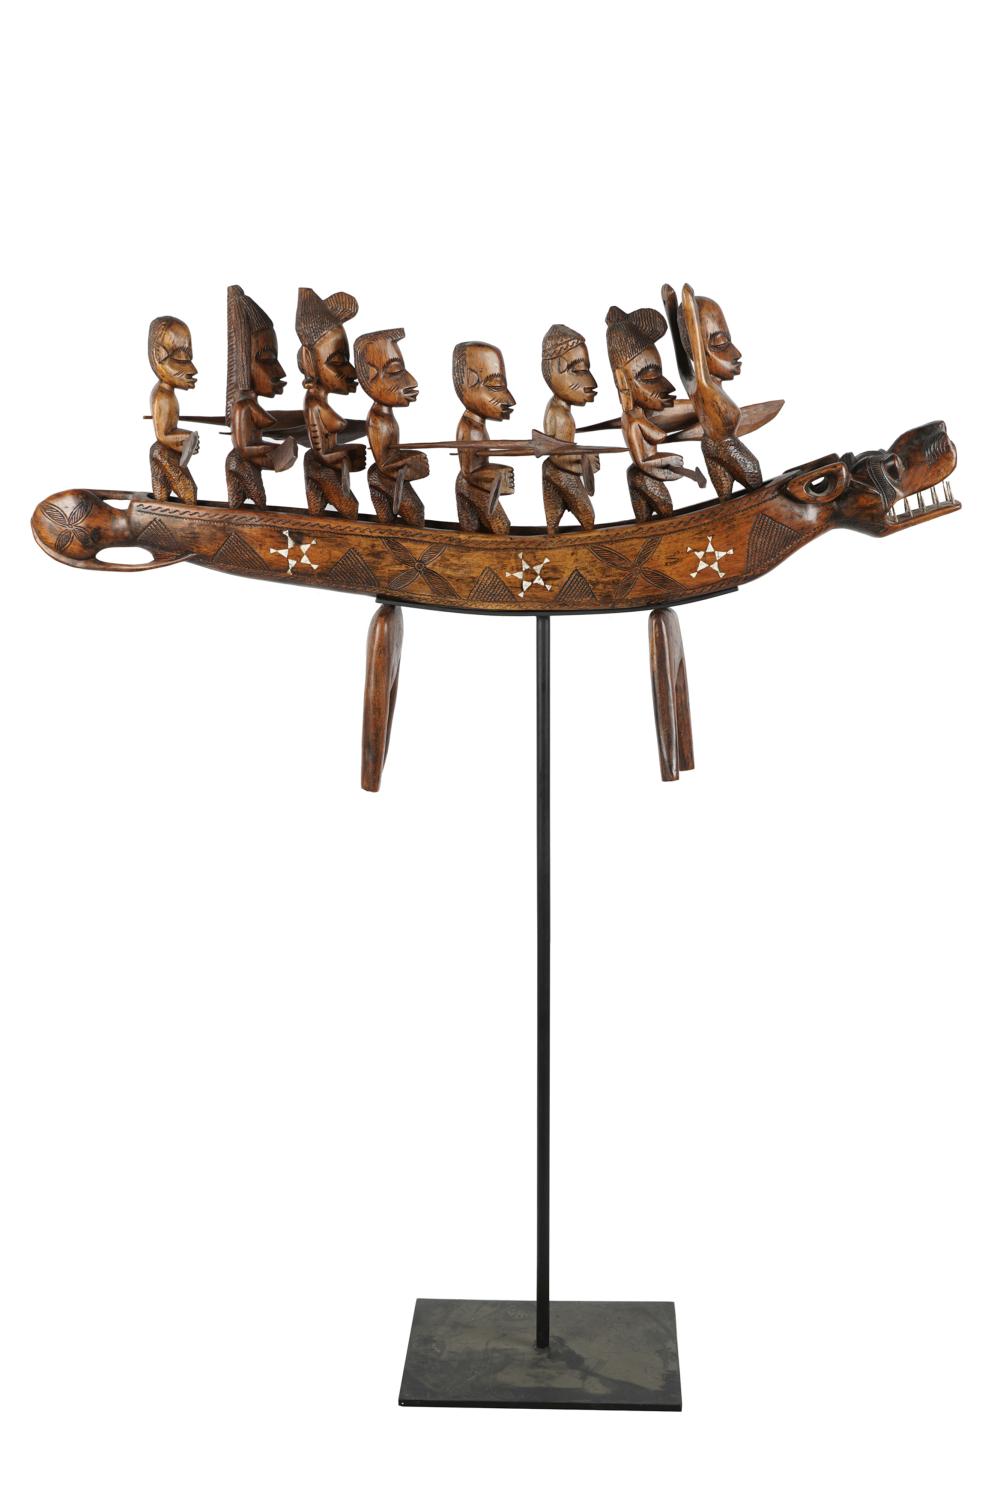 NIGERIAN INLAID WOOD BOAT CARVINGthe